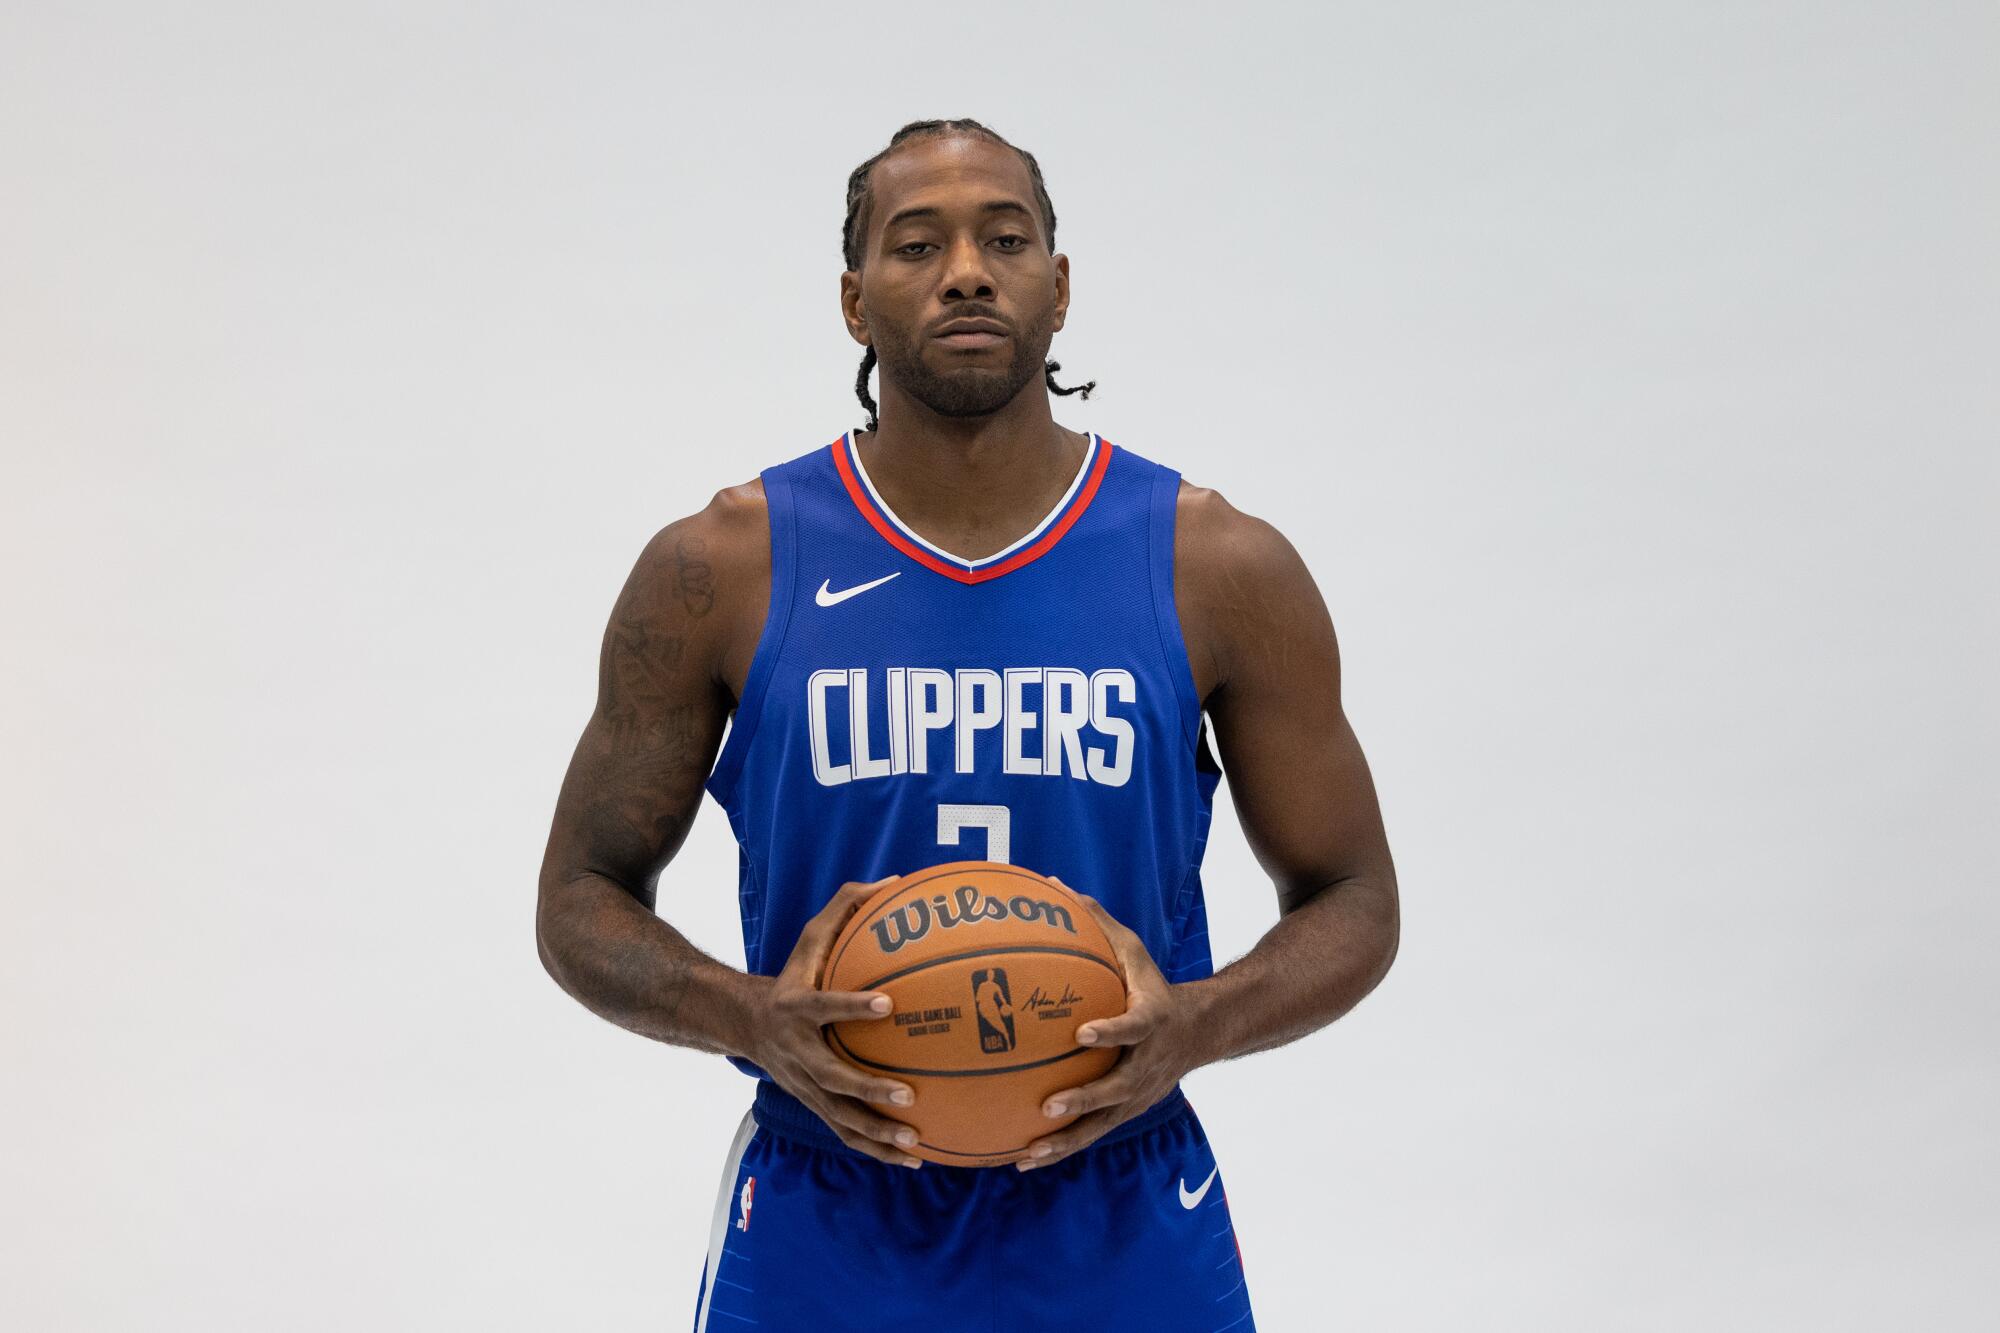 LA Clippers' Media Day provides much-needed injury updates